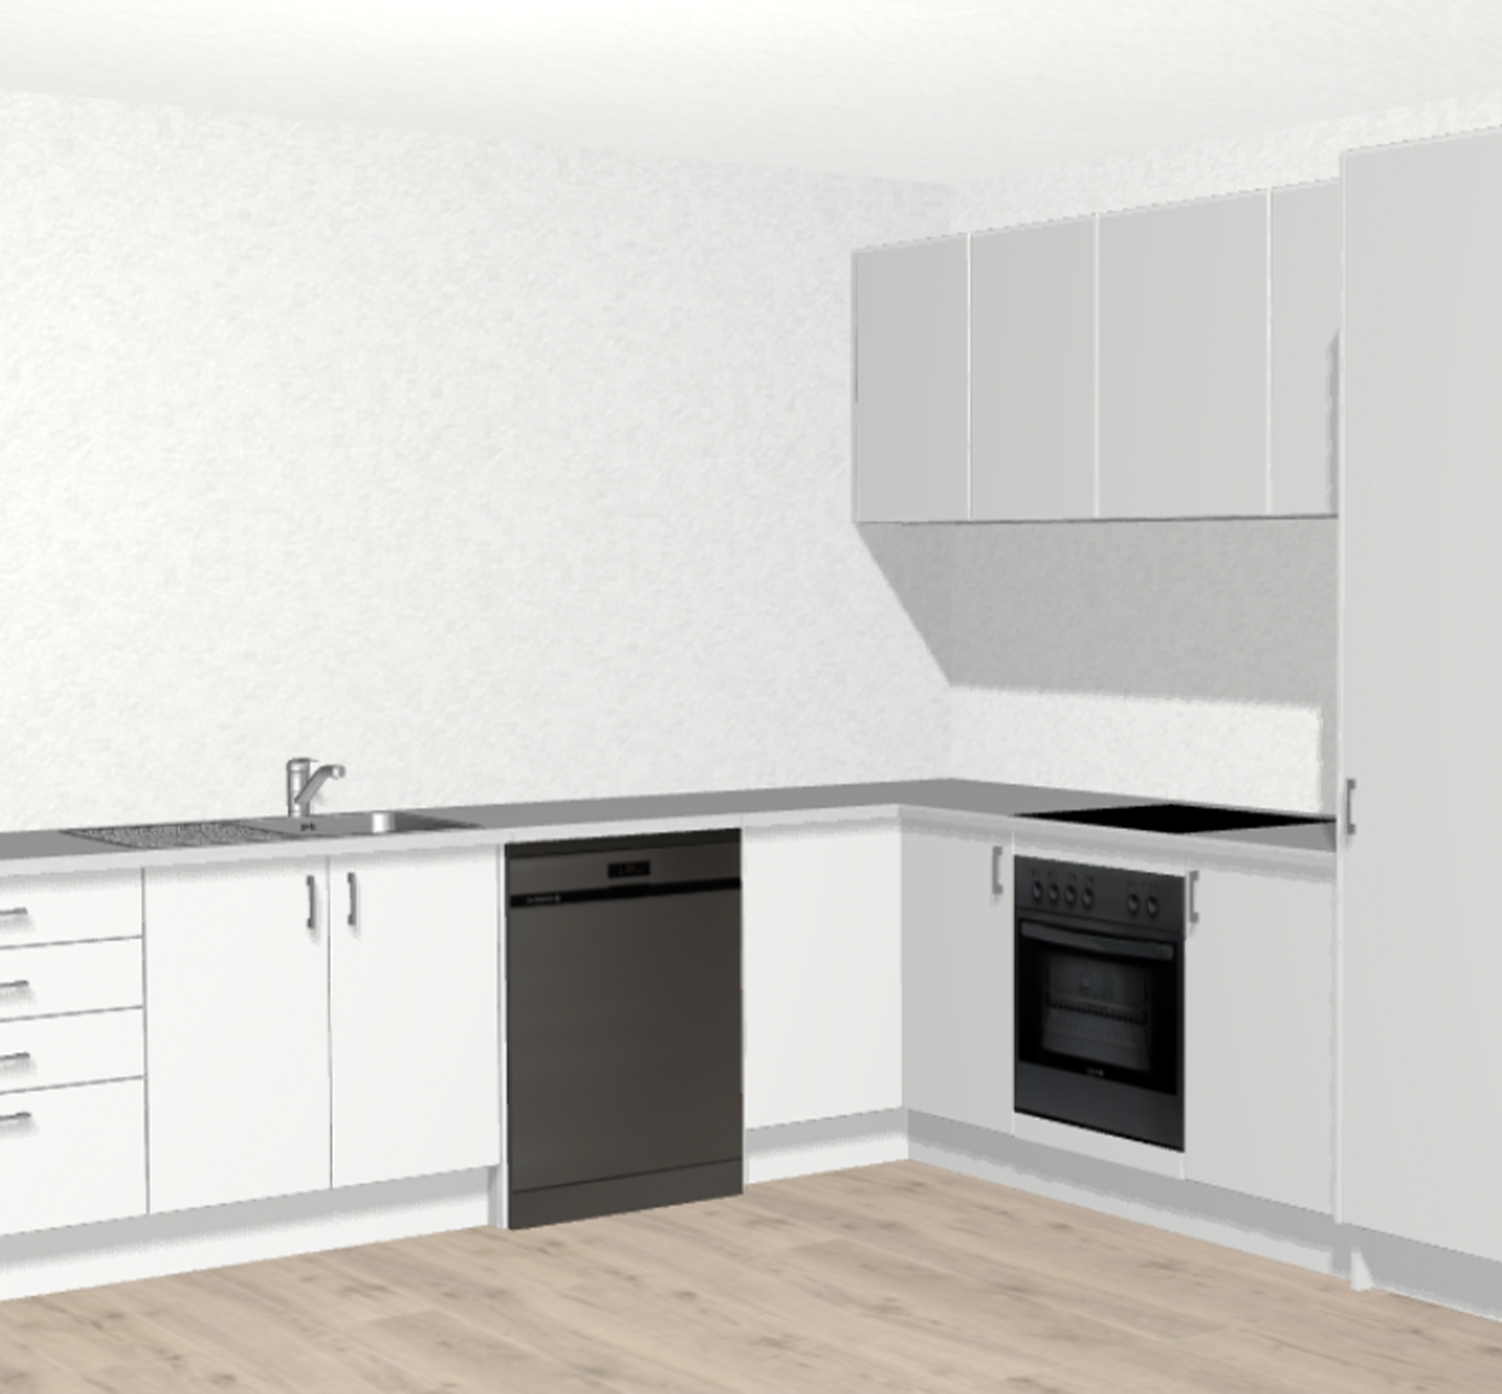 3D planner design of a L Shape kitchen in our Ruby range